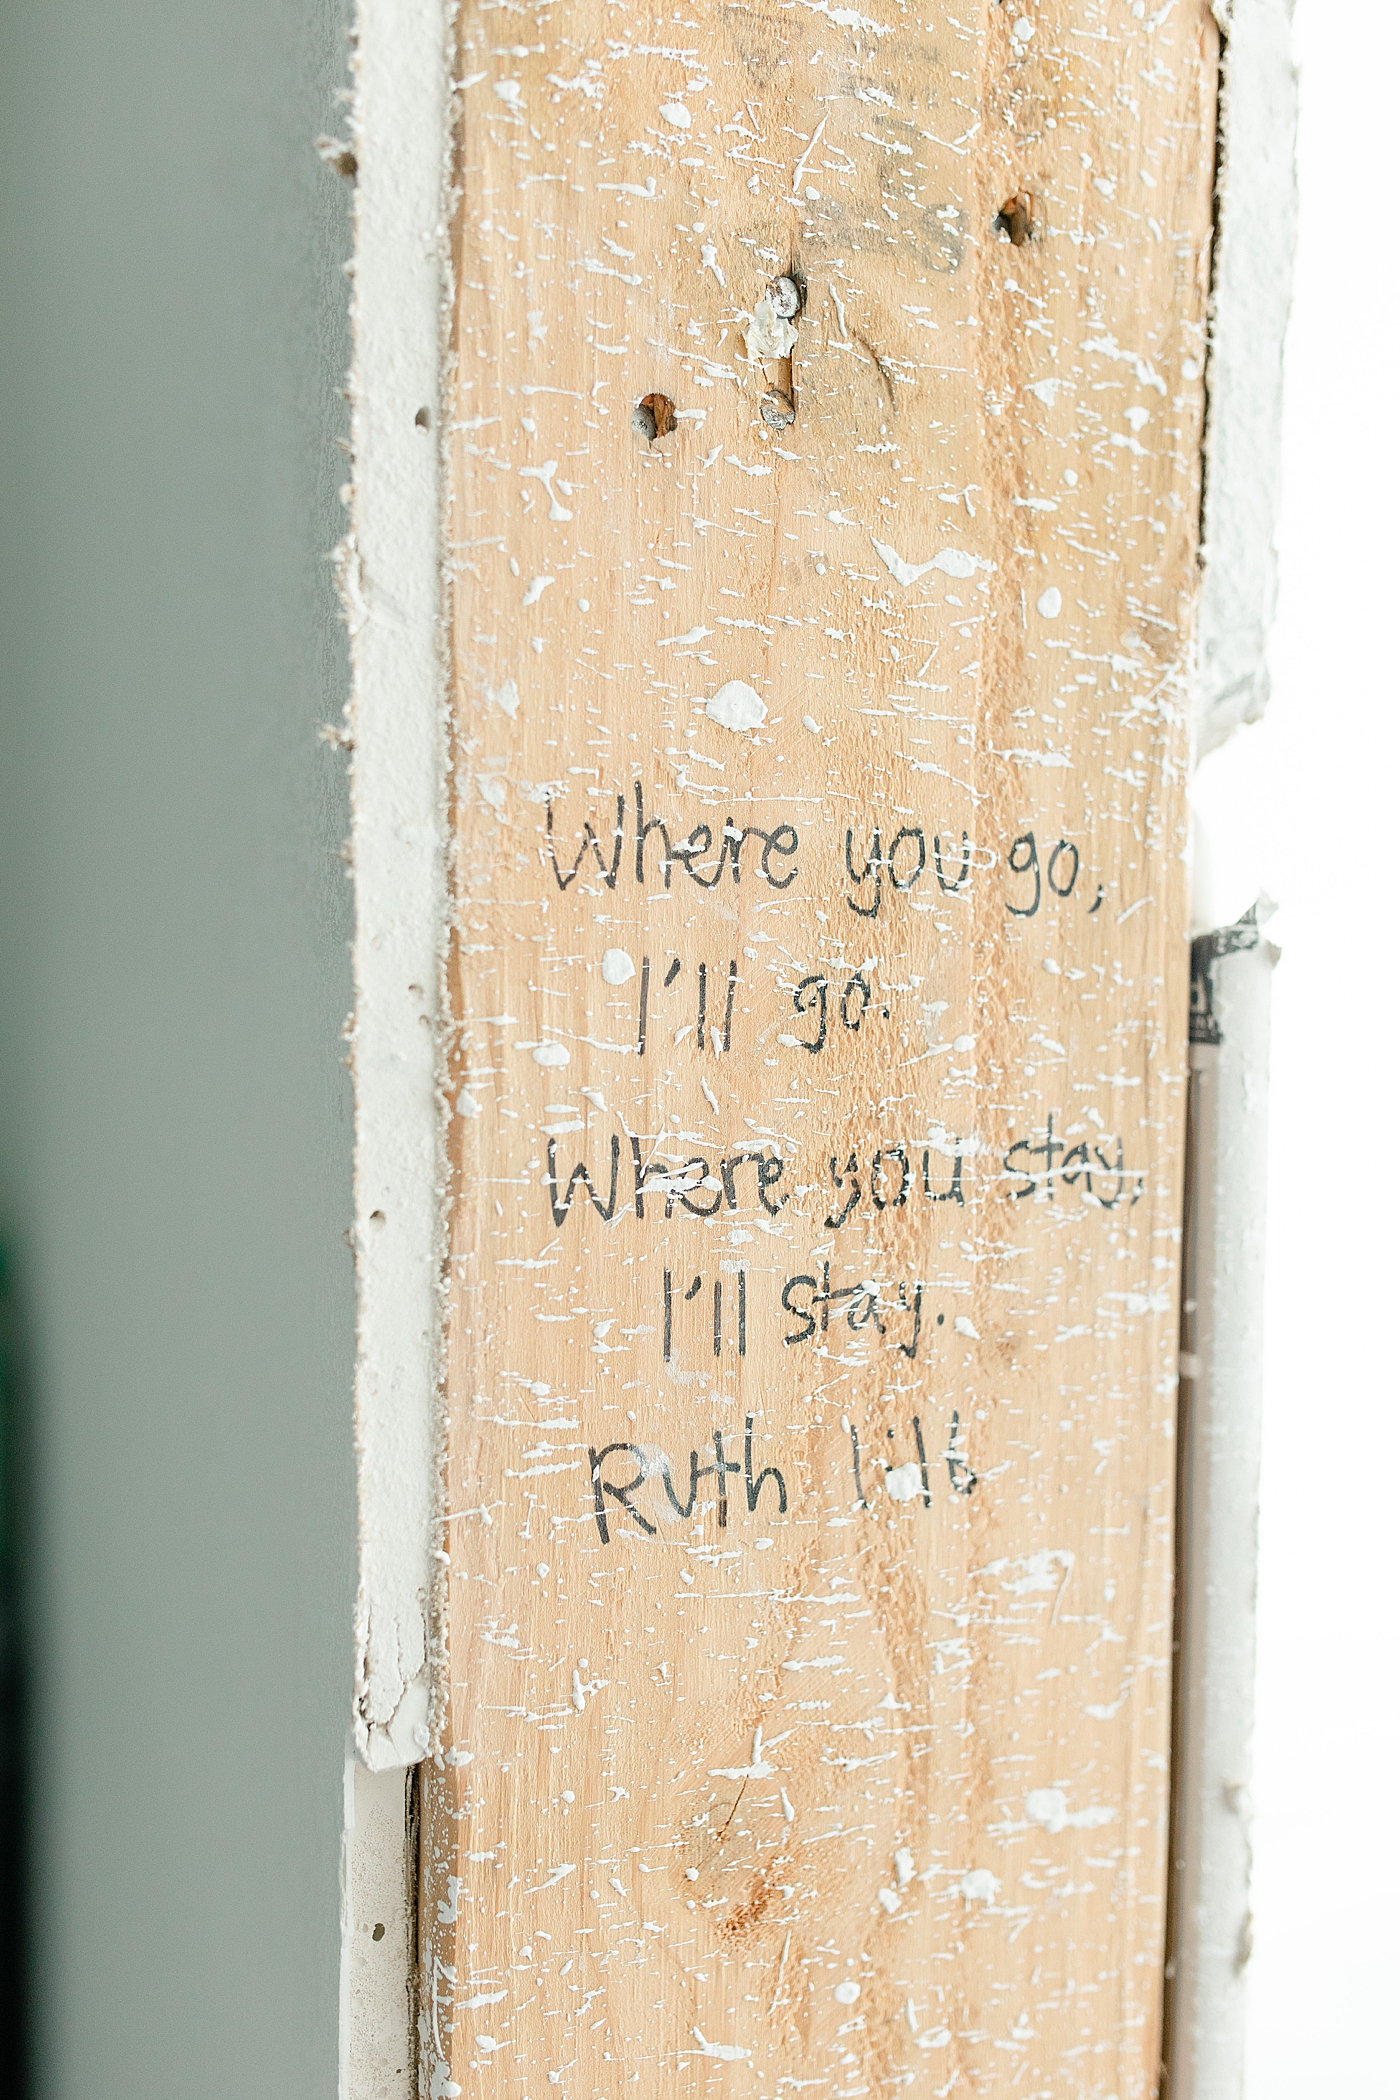 Scripture written on studs of new home being built | Photo by MS Gulf Coast Photographer Little Sunshine Photography 